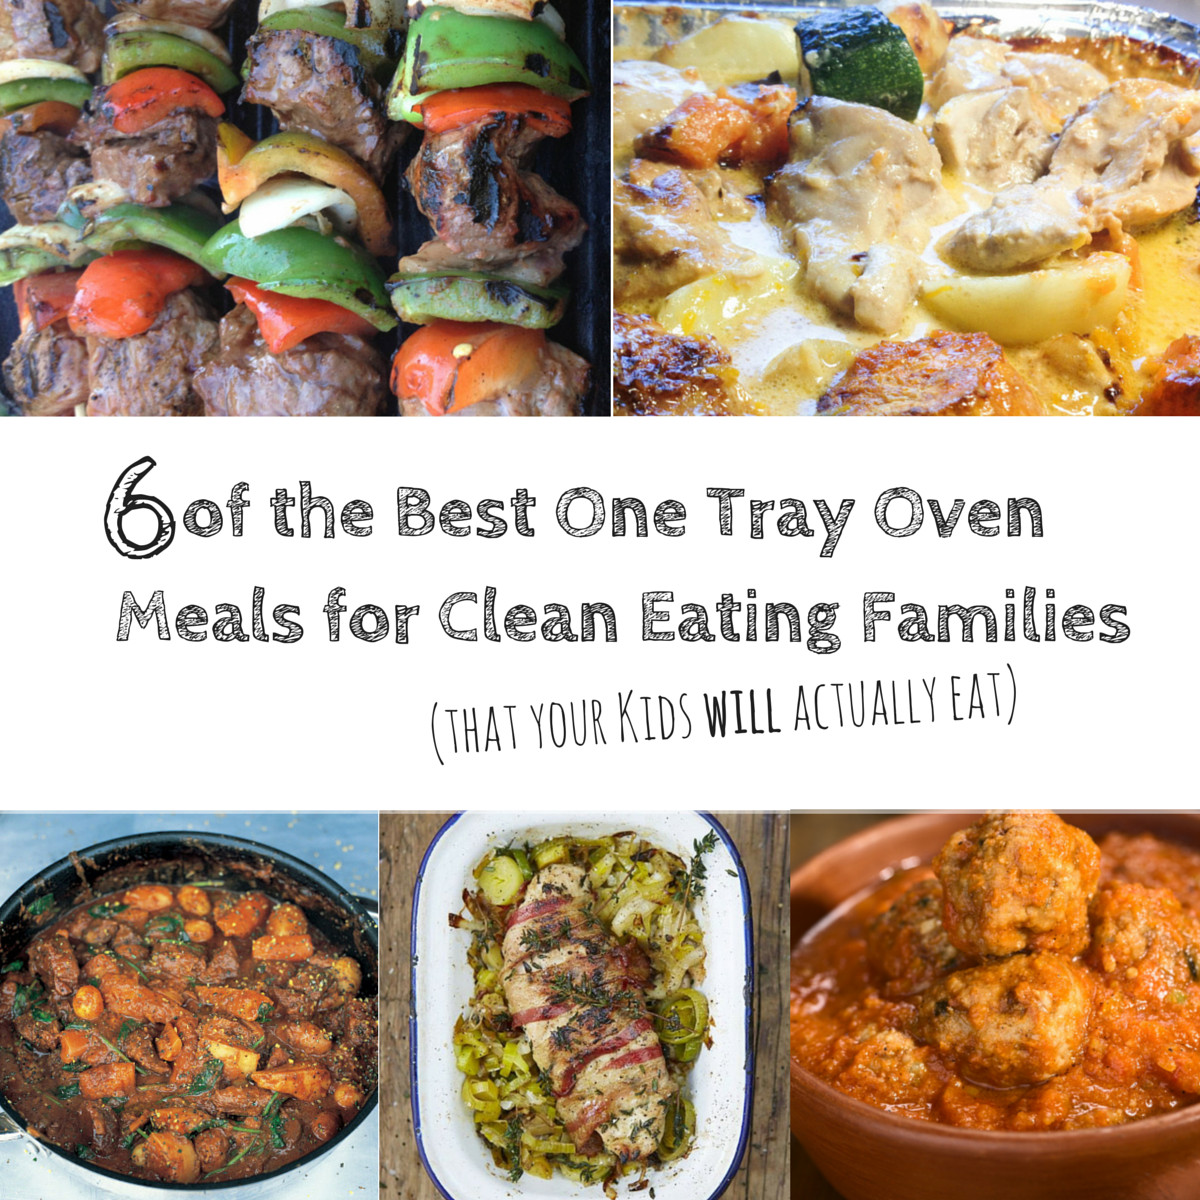 Dinners Kids Will Eat
 6 of the Best e Tray Oven Meals for Clean Eating